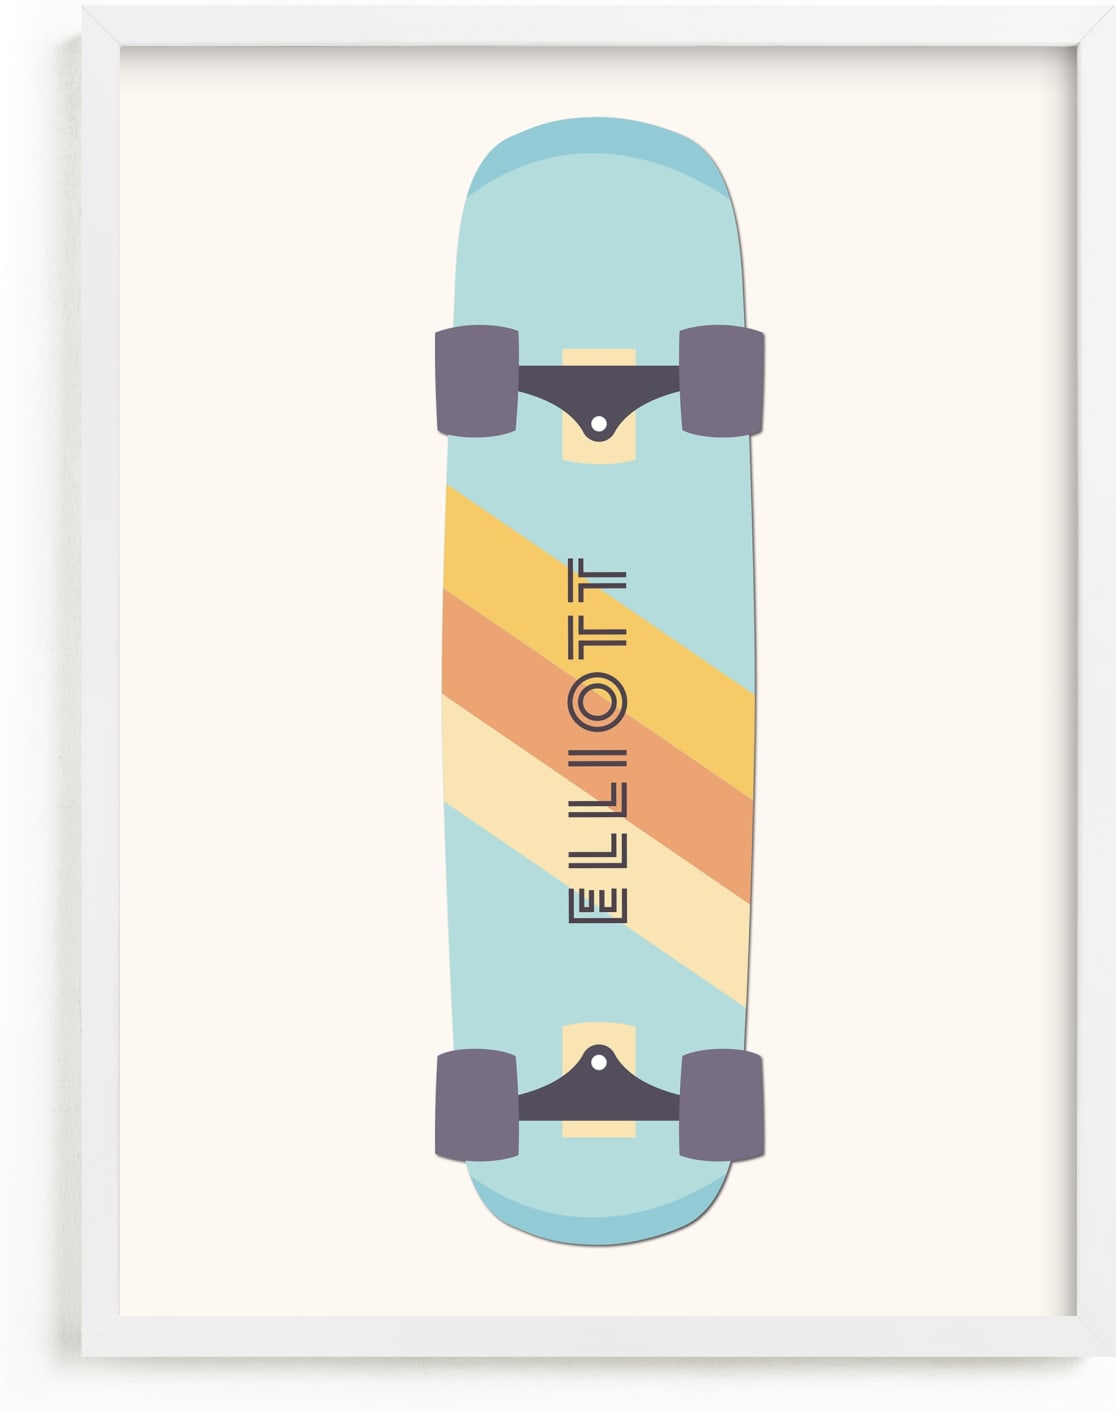 This is a beige personalized art for kid by David Michuki called Skateboard.